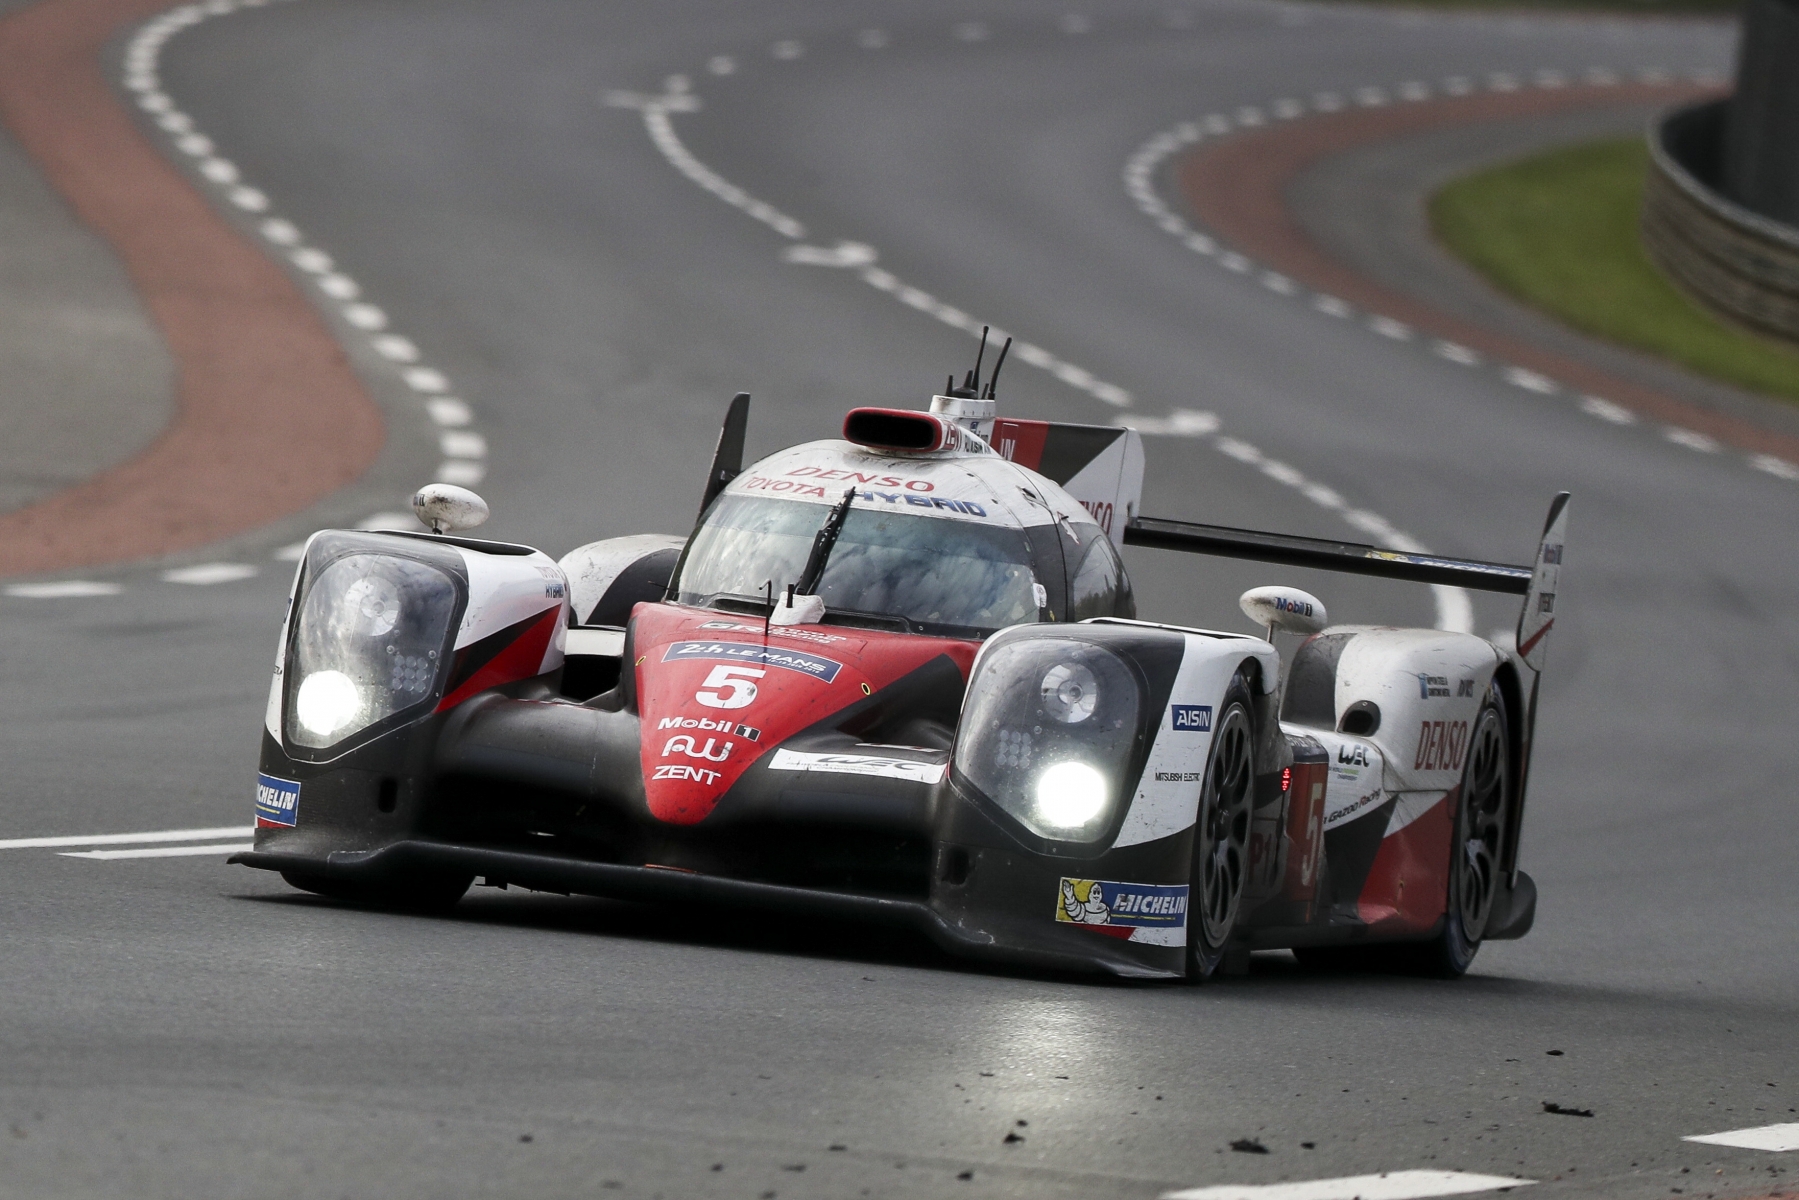 The Toyota TS050 Hybrid No5 of the Toyota Gazoo Racing driven by Sebastien Buemi of Switzerland, Anthony Davidson of Great Britain and Kazuki Nakajima of Japan in action during the 84th 24-hour Le Mans endurance race, in Le Mans, western France, Sunday, June 19, 2016. (AP Photo/Kamil Zihnioglu) France Le Mans 24h Auto Racing